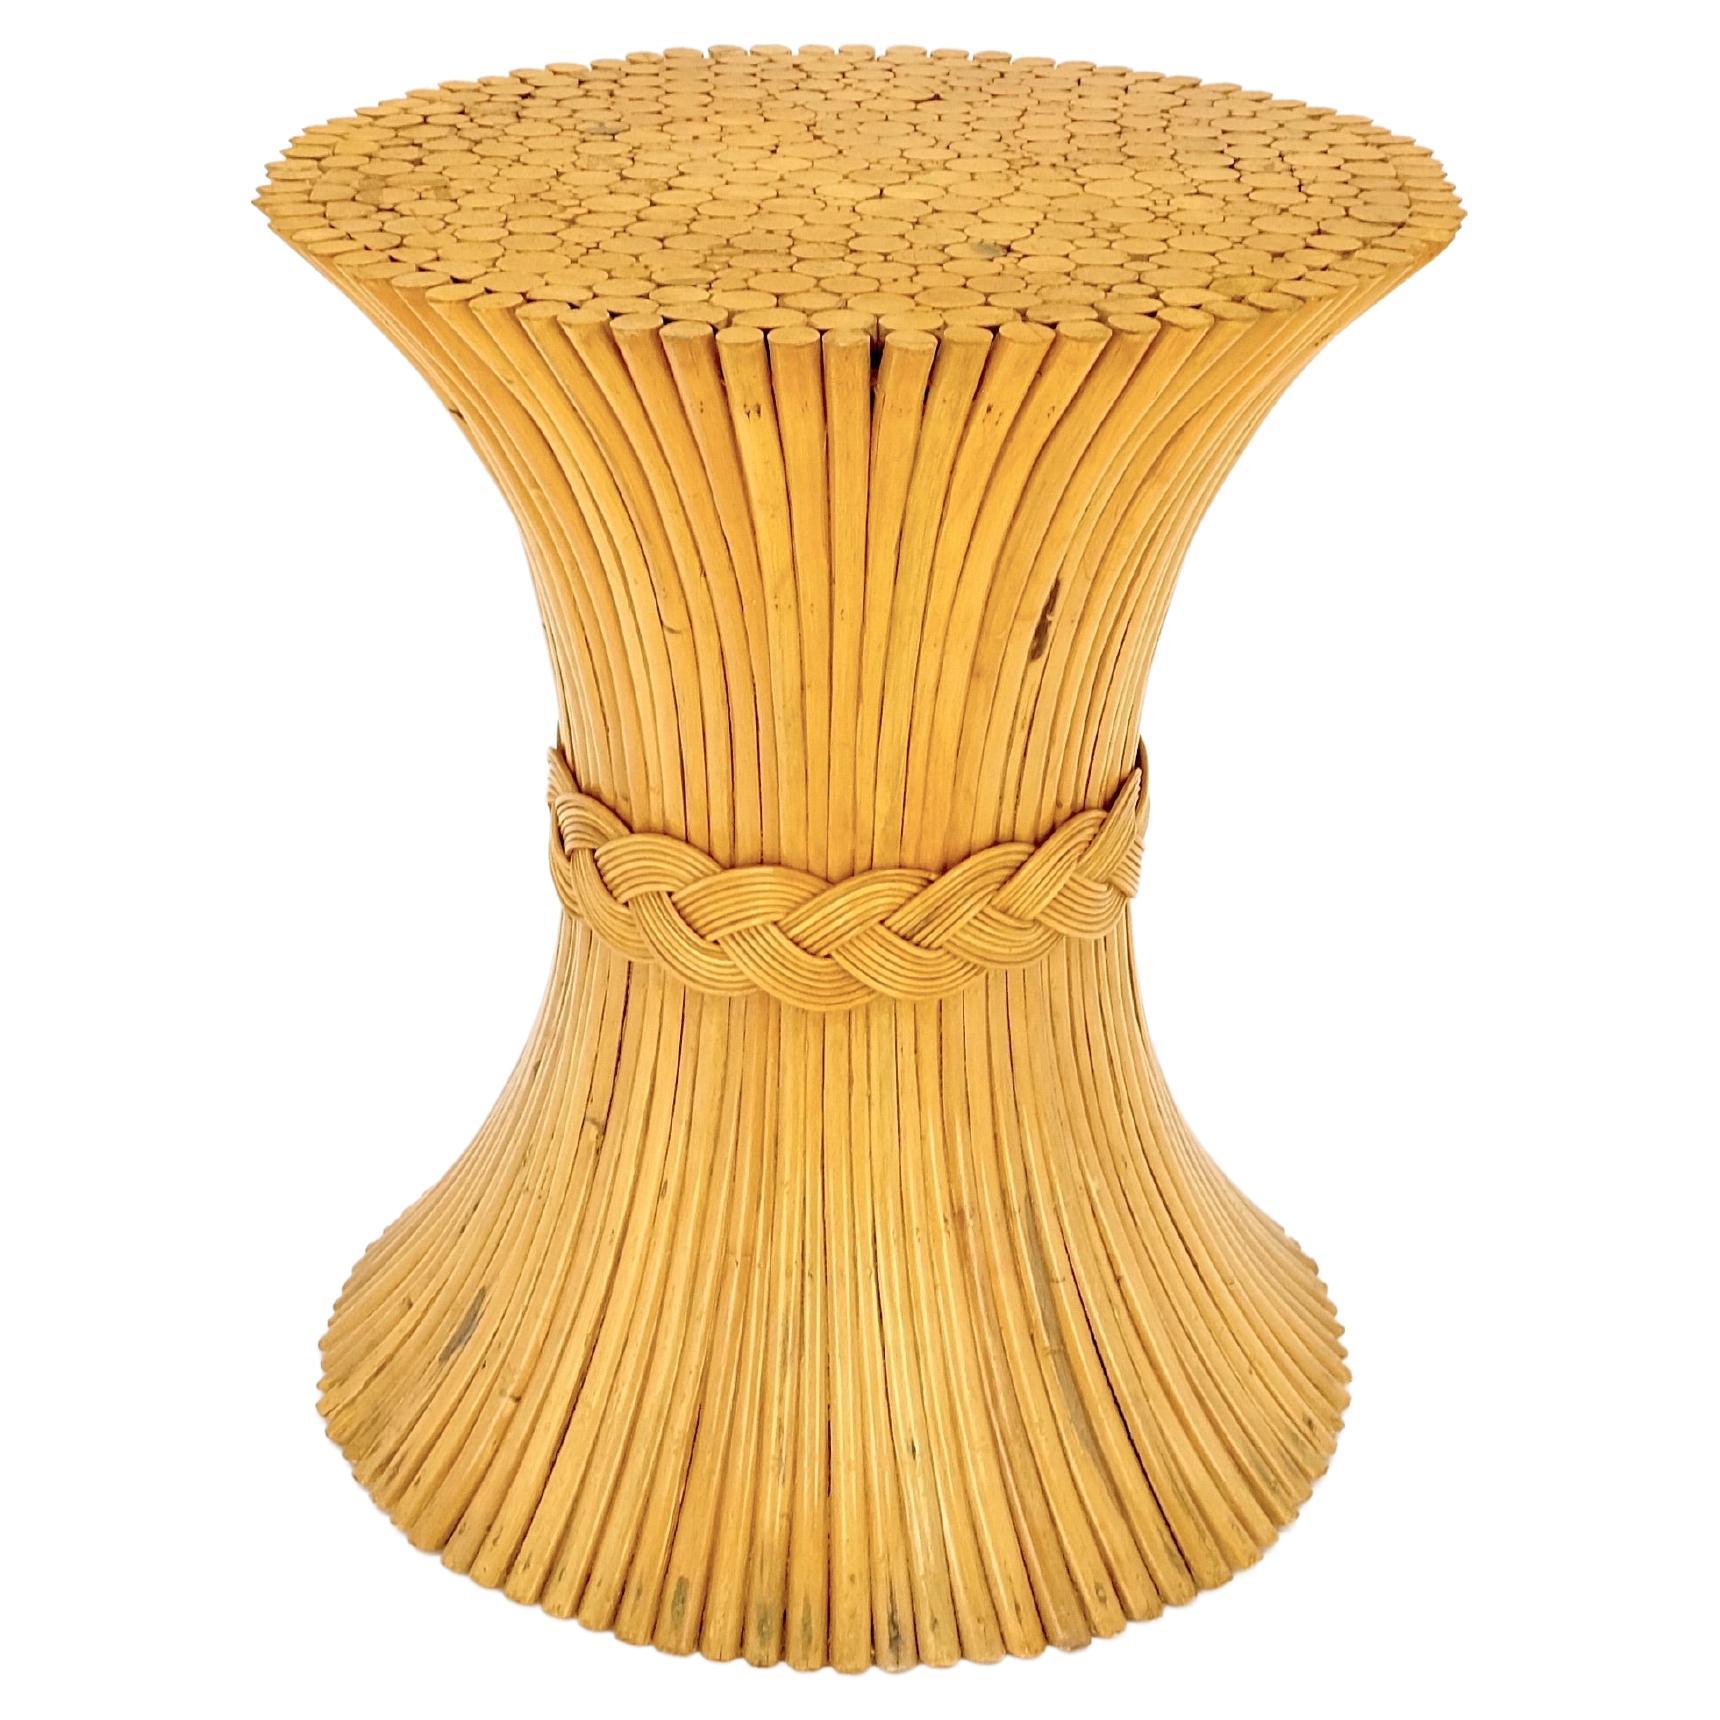 Sheath of "Wheat" Style Round Base for Round Glass Dining Conference Table